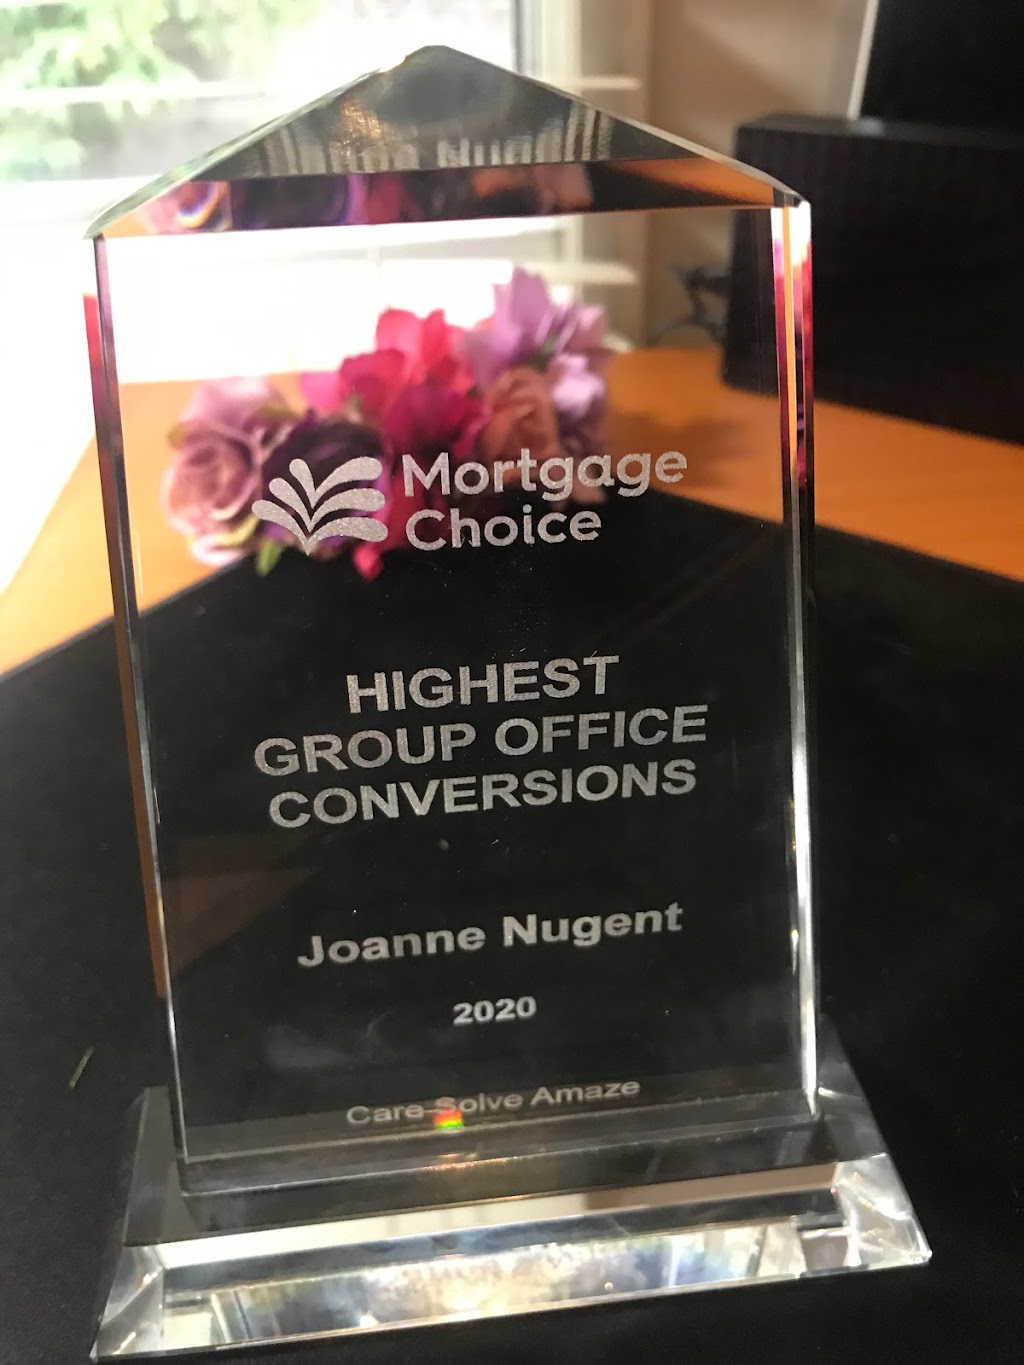 Joanne Nugent - Mortgage Choice Mortgage - Broker | finance | 14 Ascot Cres, Samford Valley QLD 4520, Australia | 0409363420 OR +61 409 363 420